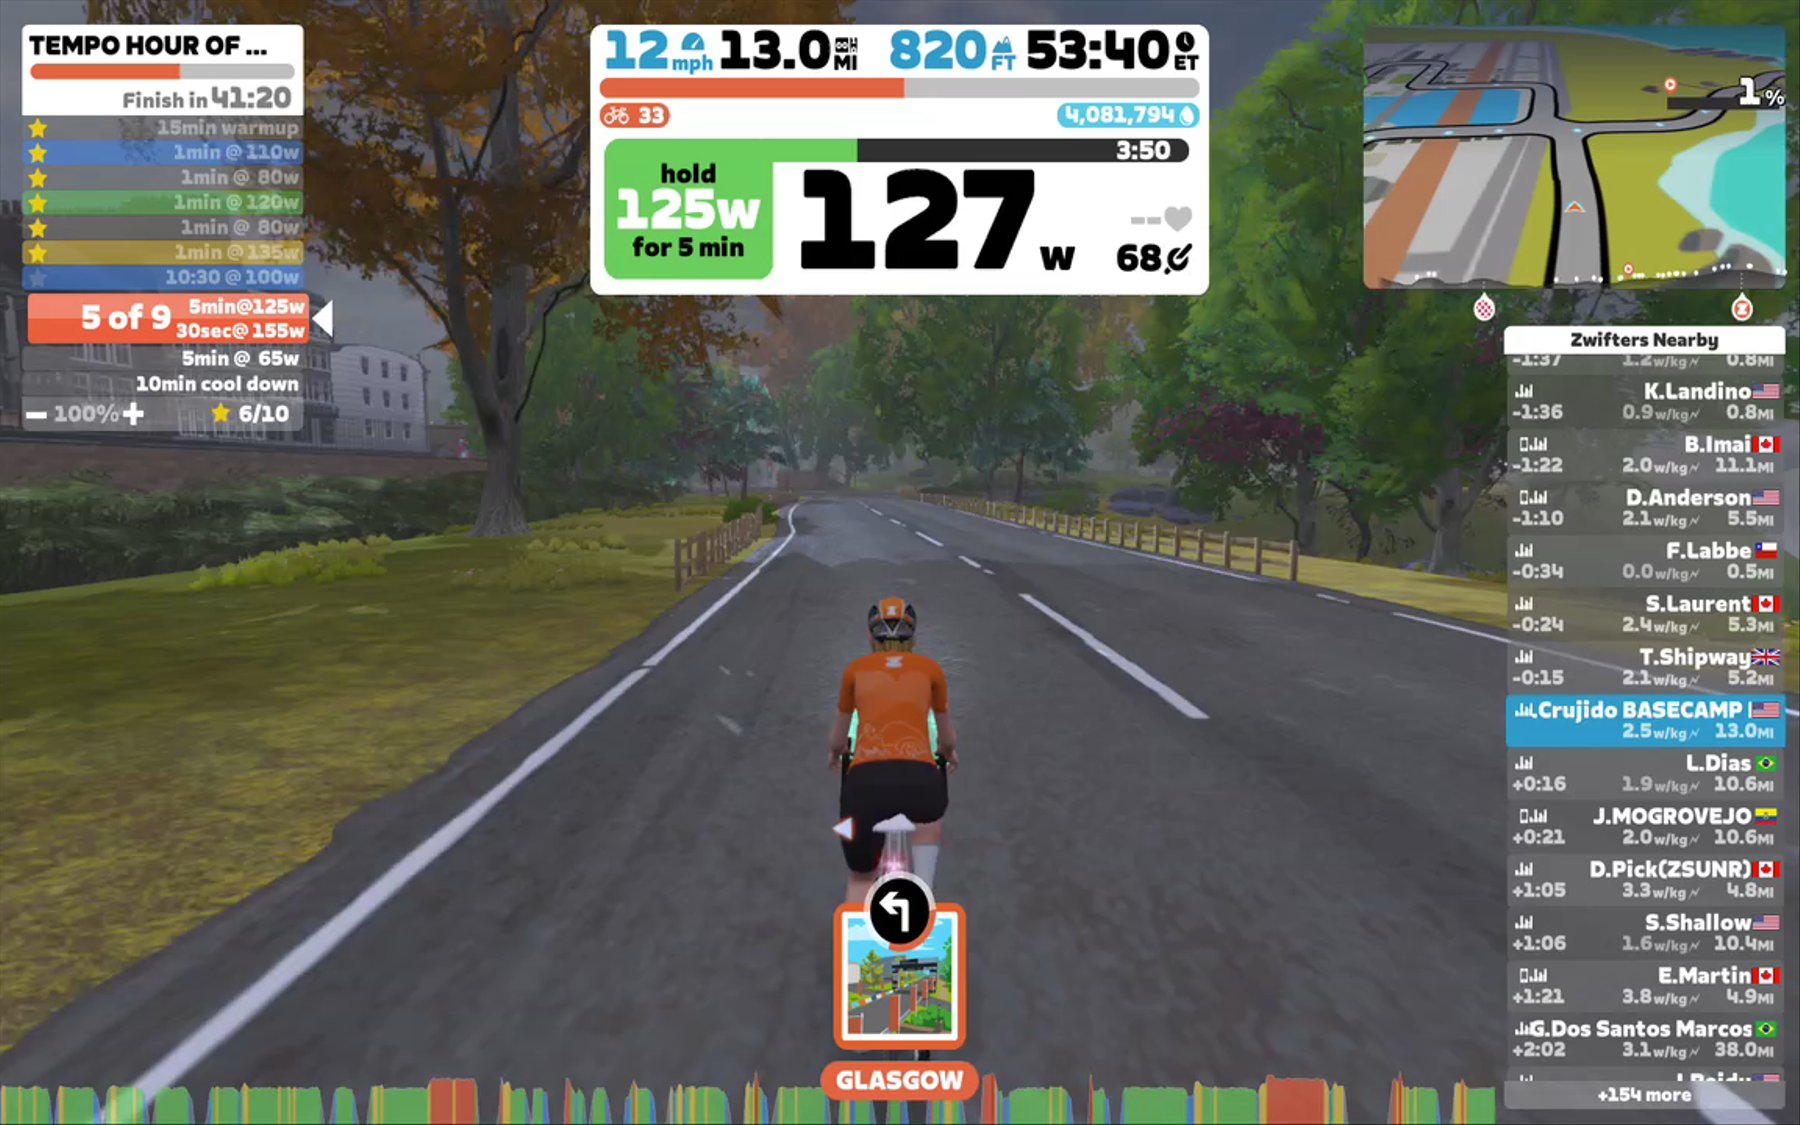 Zwift - TEMPO HOUR OF POWER (50) in Scotland